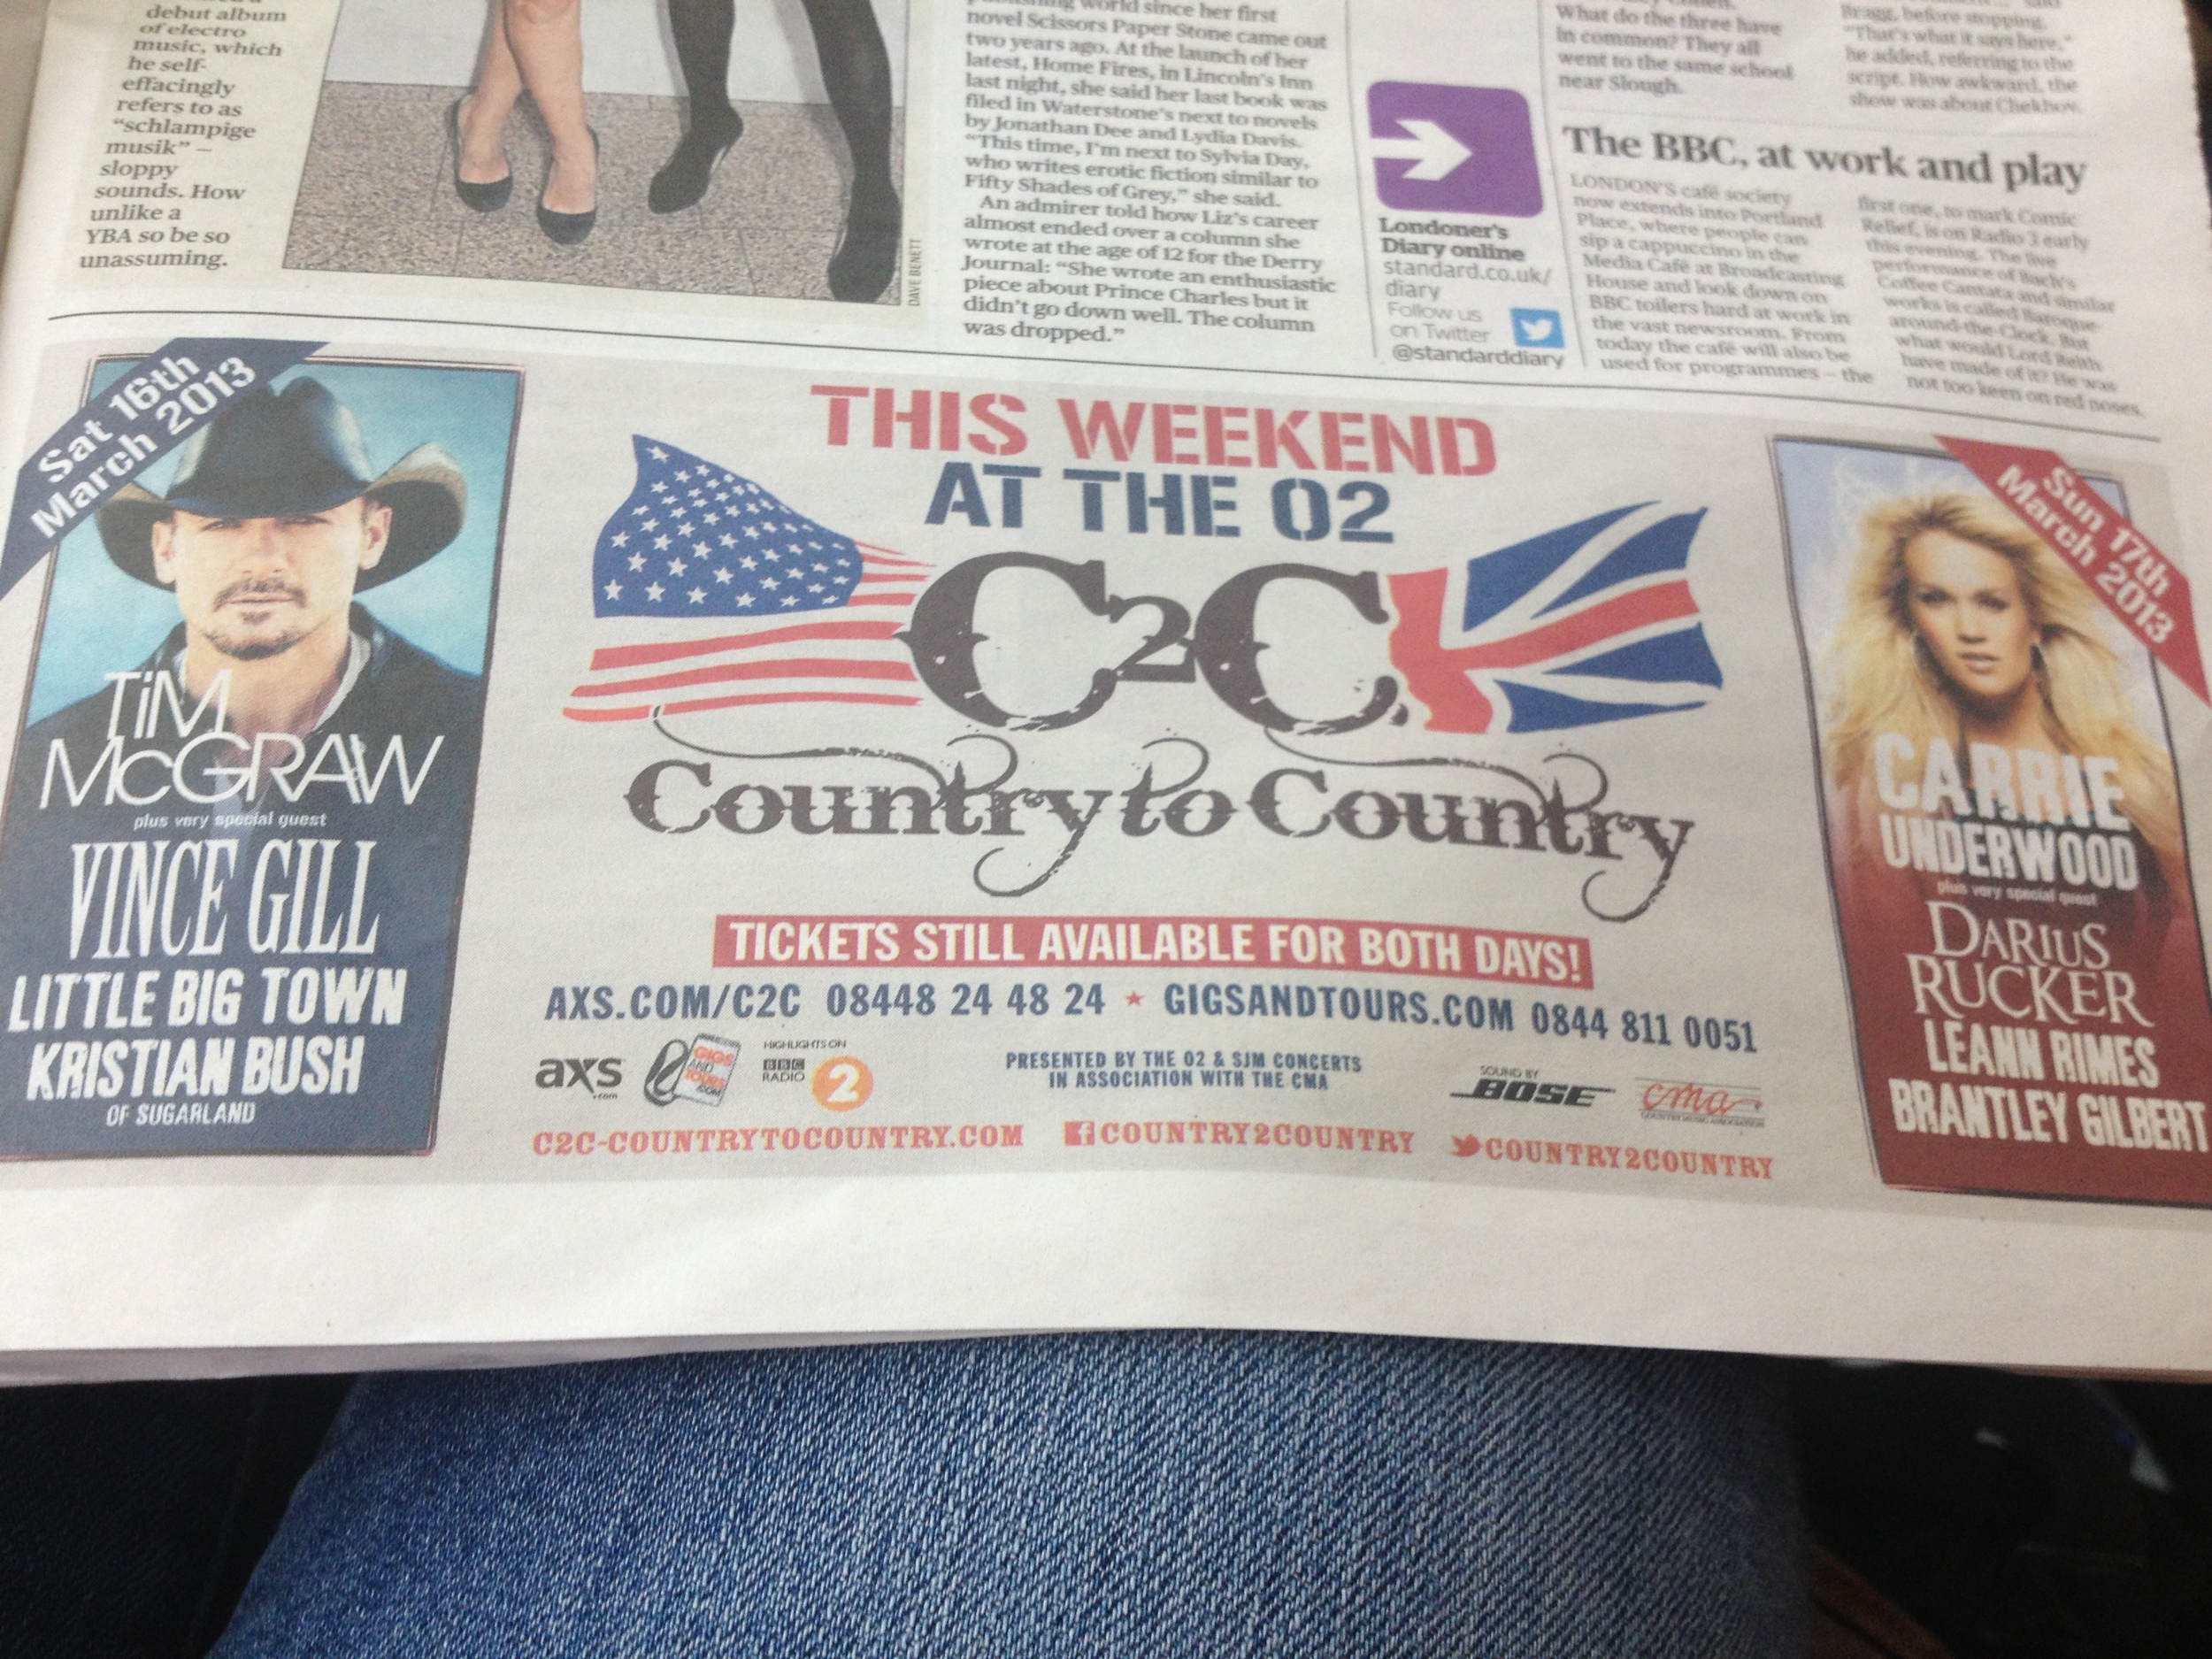  ​I can move to England and still go to country concerts! 